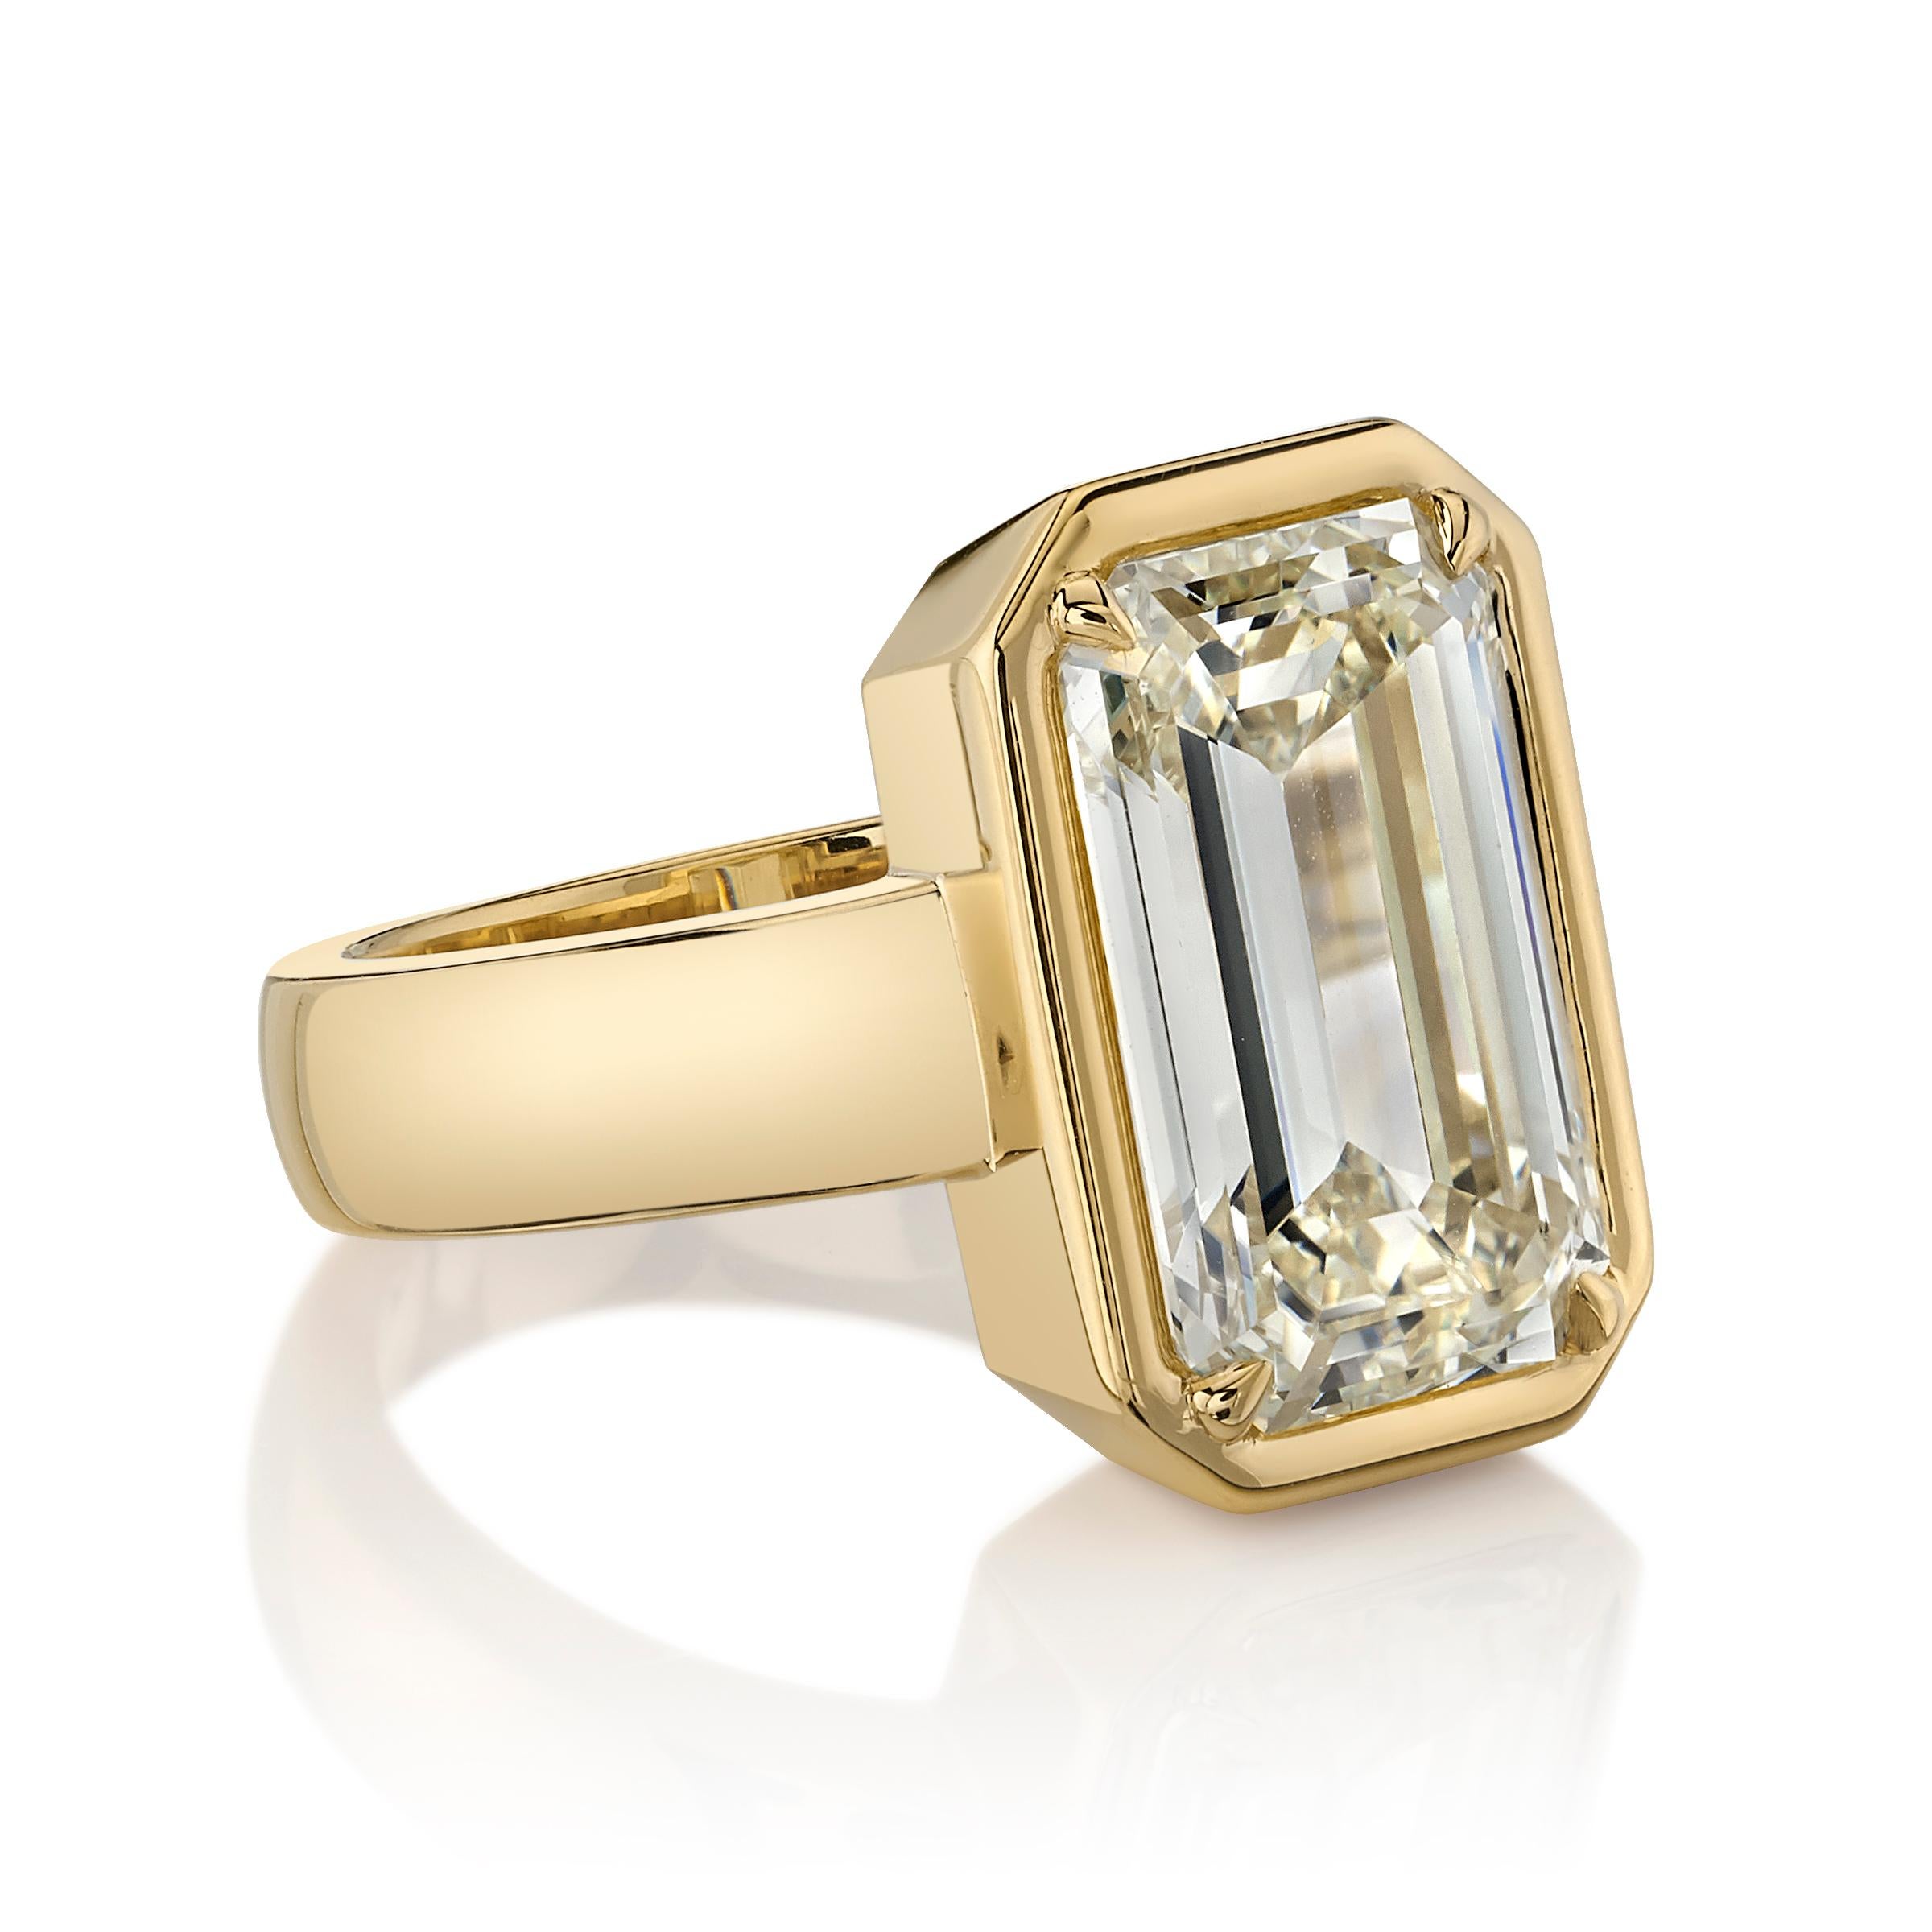 5.64ctw W-X/SI1 GIA certified Emerald cut diamond set in a handcrafted 18K yellow gold mounting.

Ring is a size 6 and can be sized to fit.